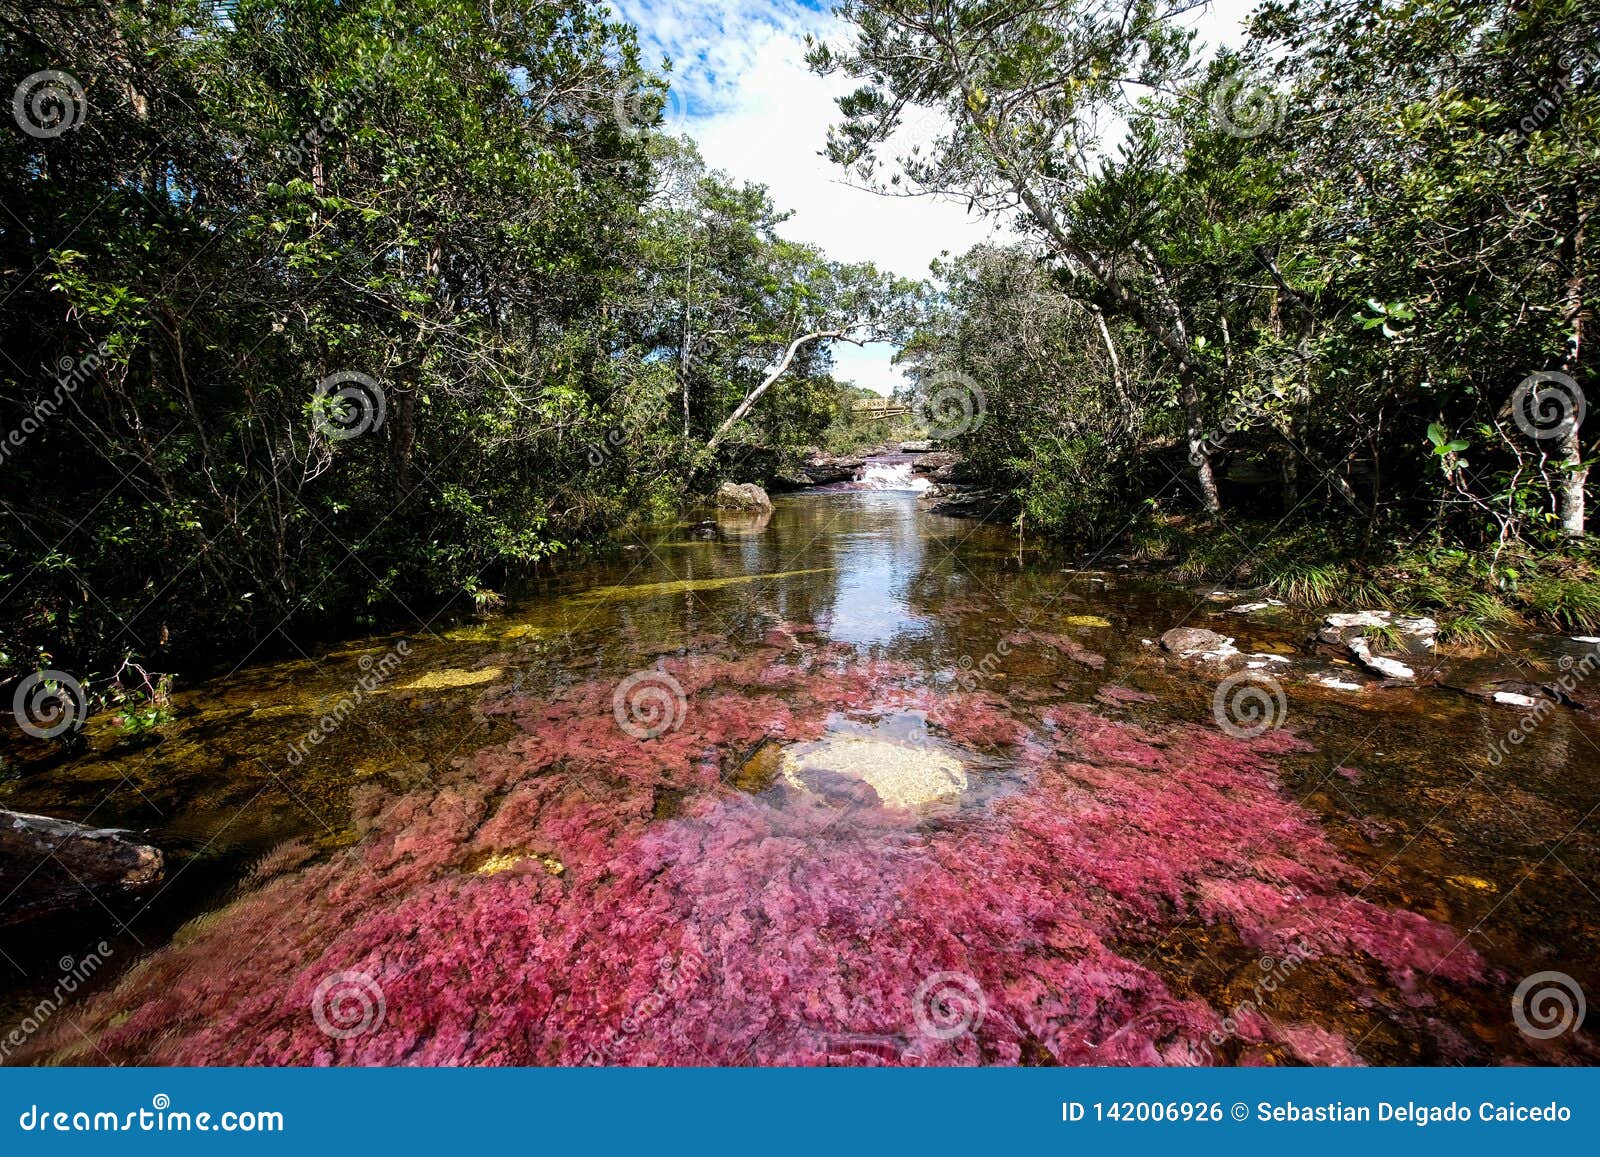 a view of the colorful plants in the caÃÂ±o cristales river